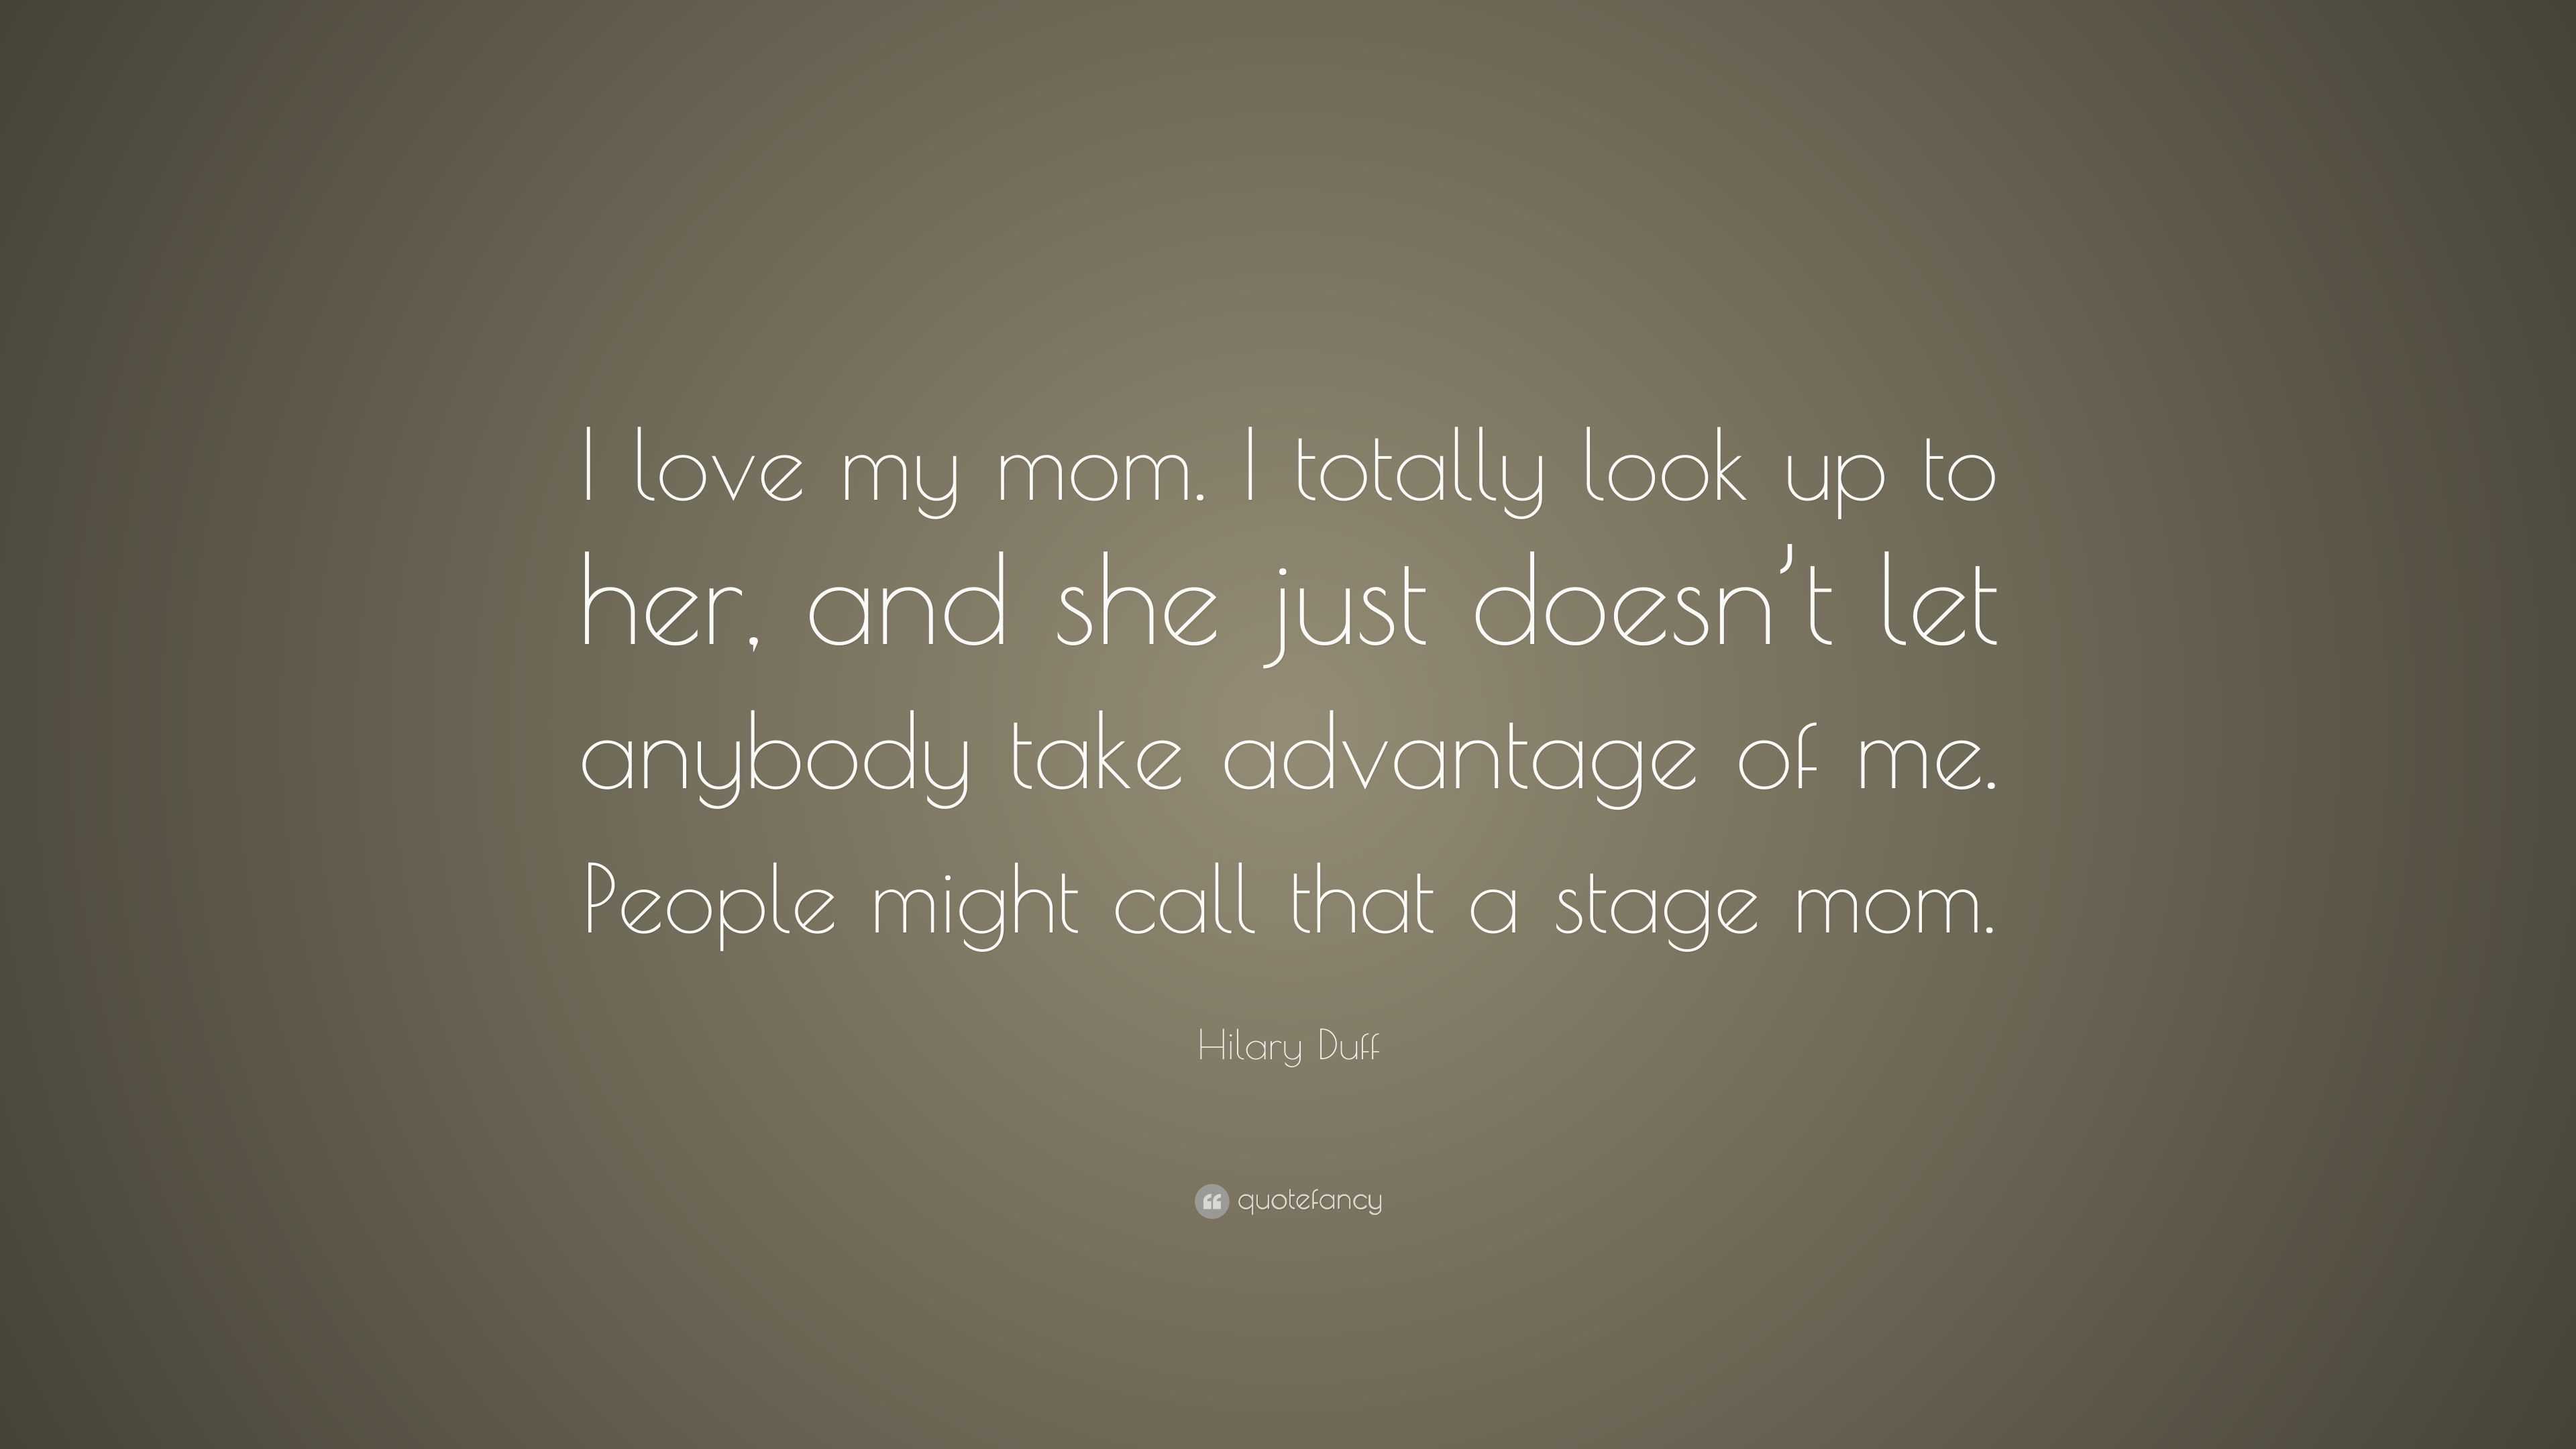 Hilary Duff Quote: “I love my mom. I totally look up to her, and she ...